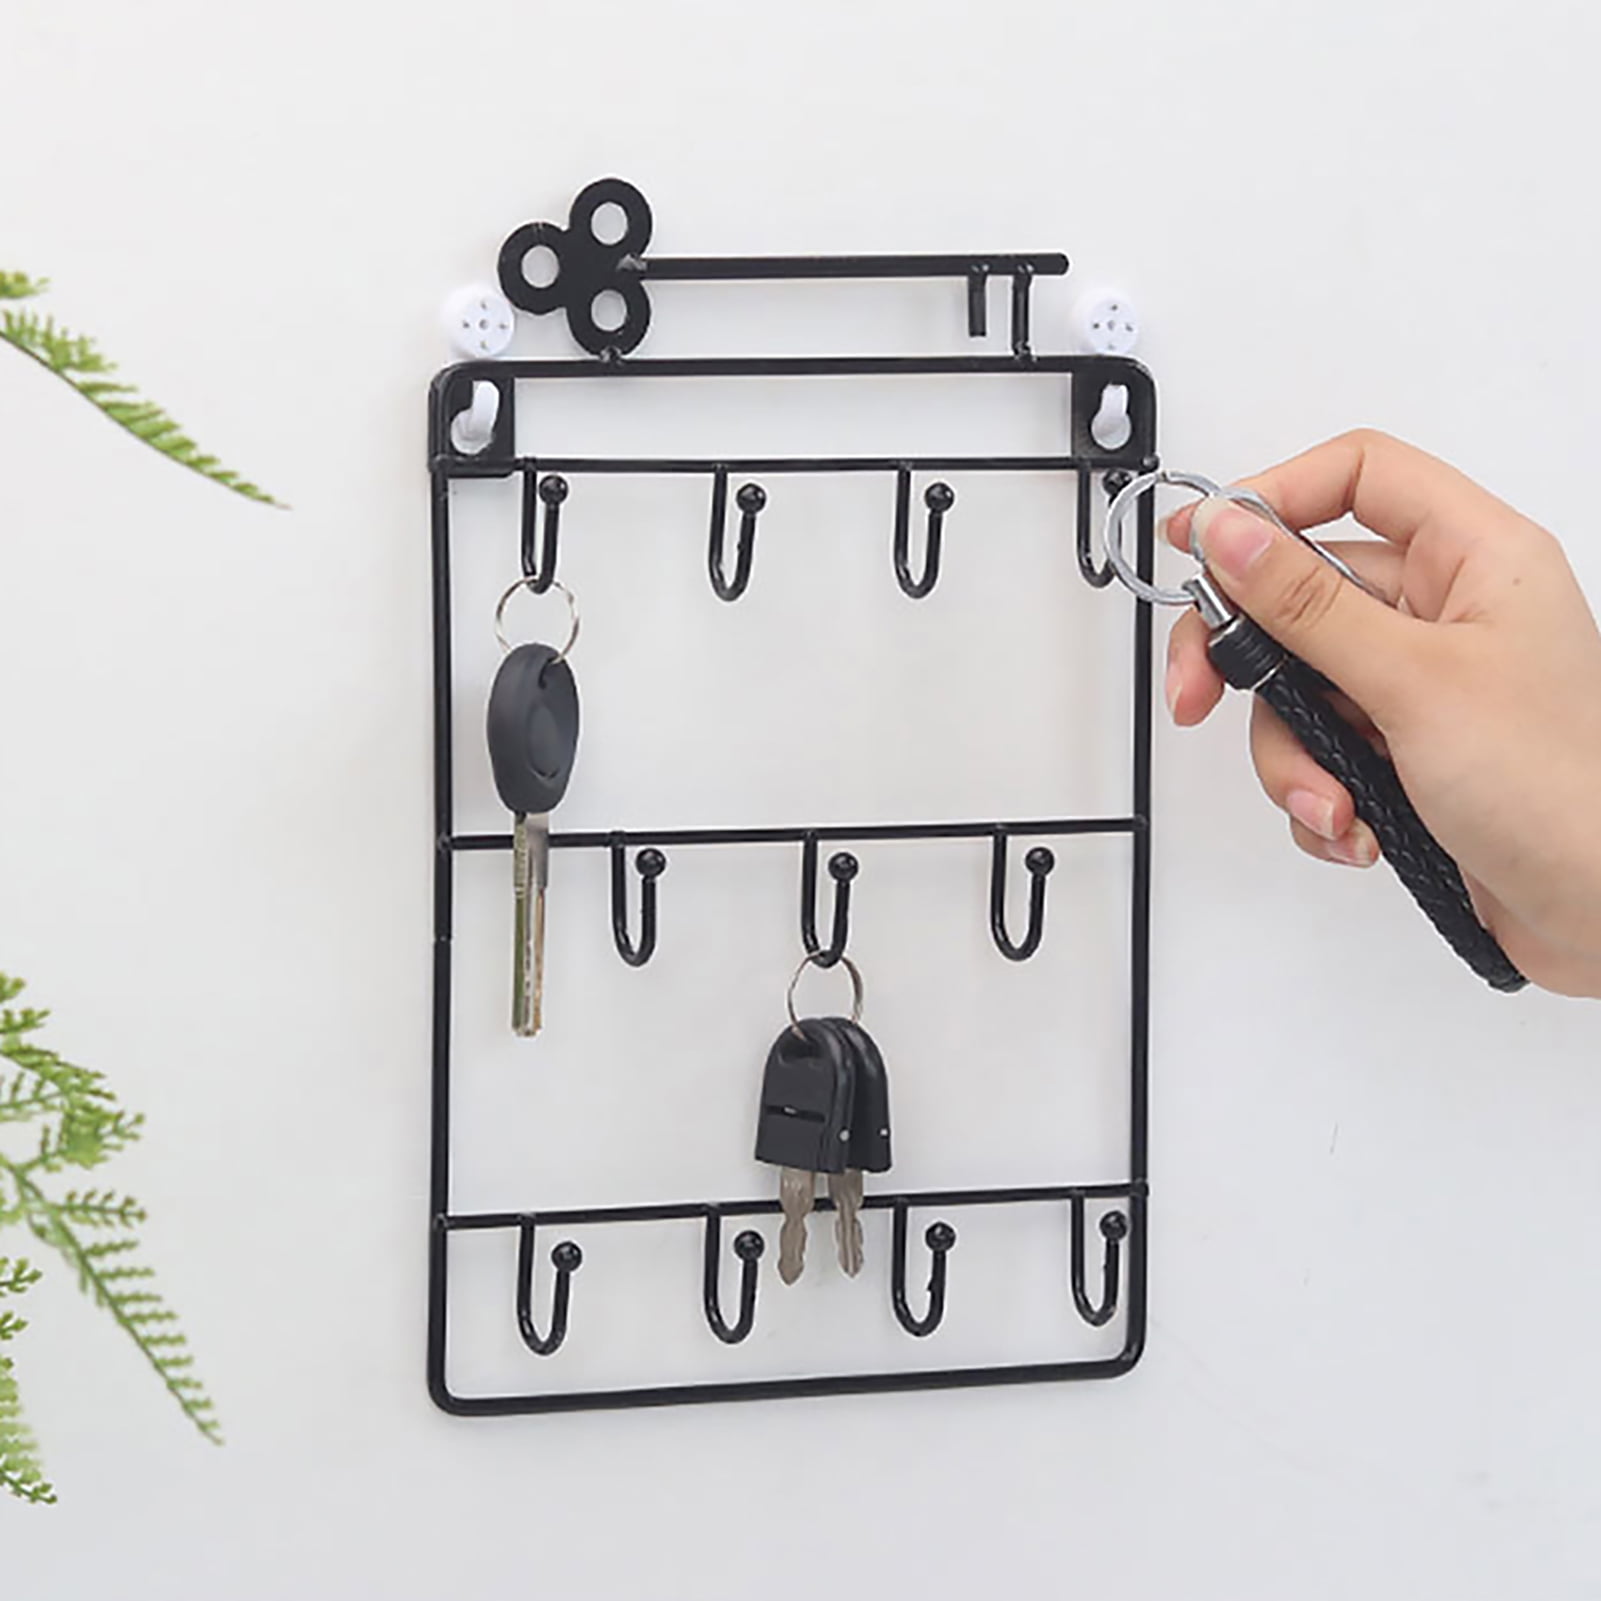 Details about   Home Décor Wall Mounted Key Chain Holder/Organizer Key 6 Hooks Hanger 